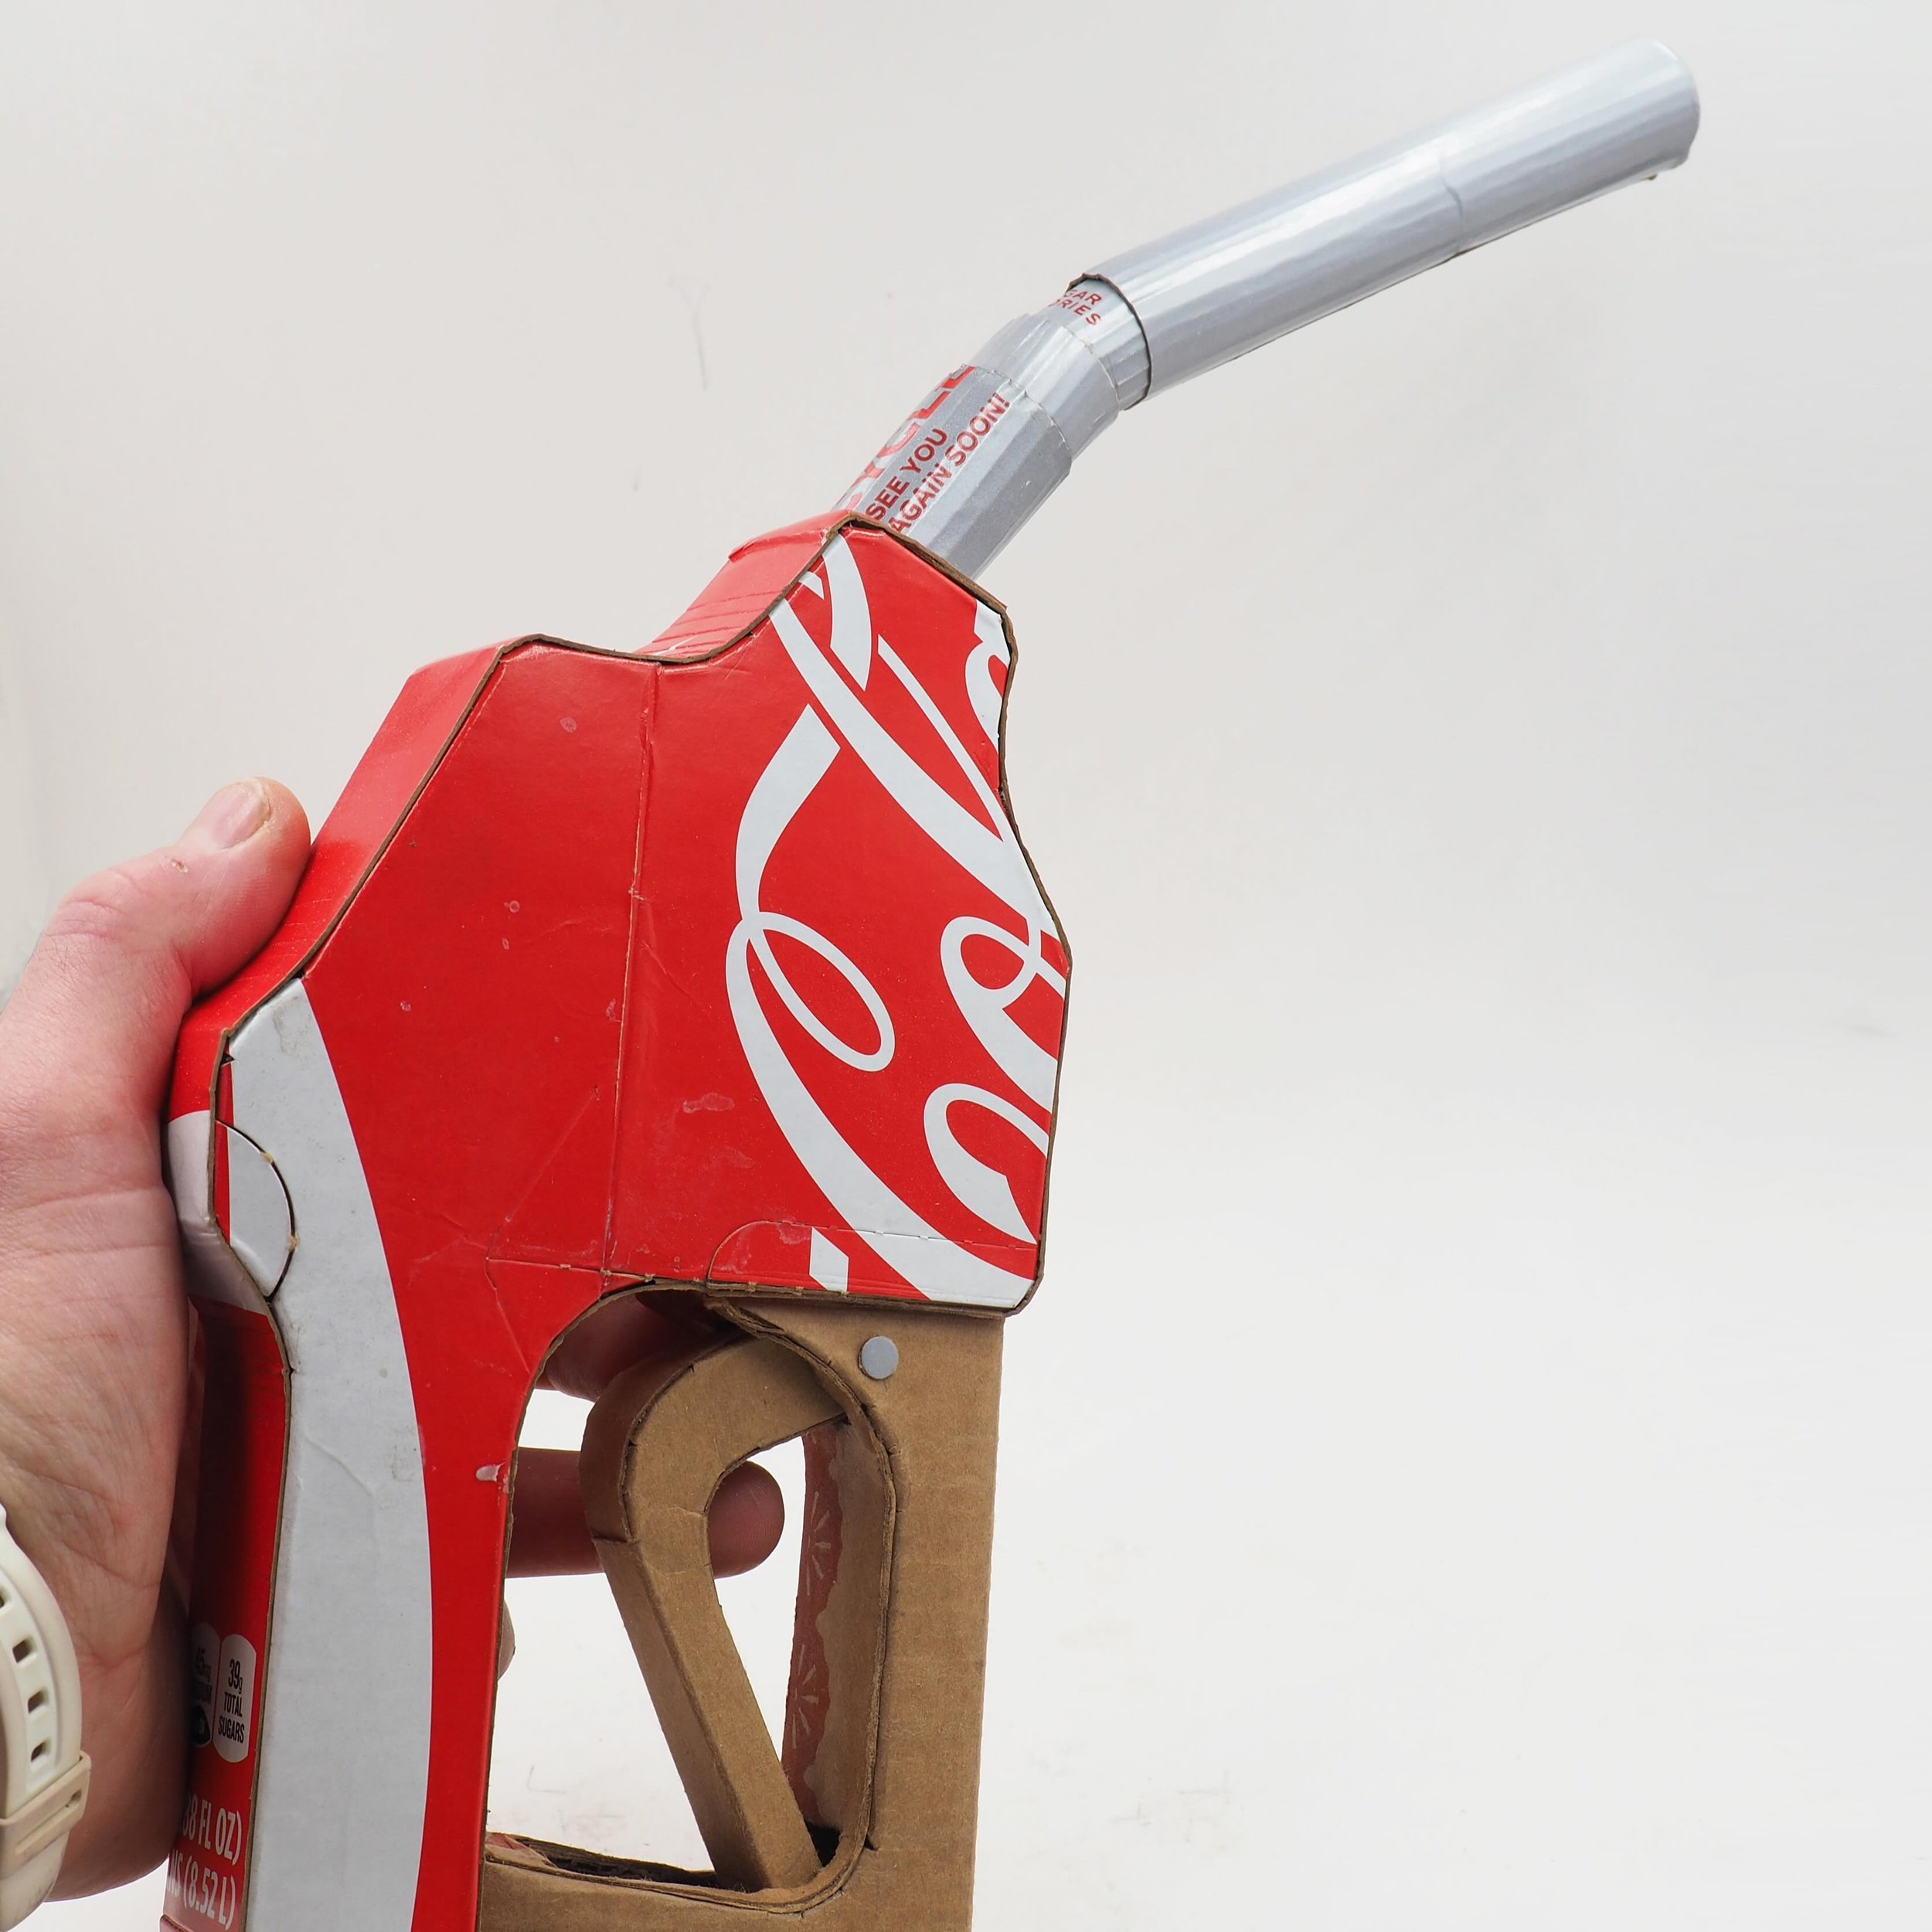 ready to fill up? There&rsquo;s more where this came from. More gas &lsquo;notzles&rsquo; (3 more, I think), a full size gas pump replica made from nothing but beer, liquor &amp; soda boxes, a massive gas can, motor oil bottles&hellip; all of it &amp